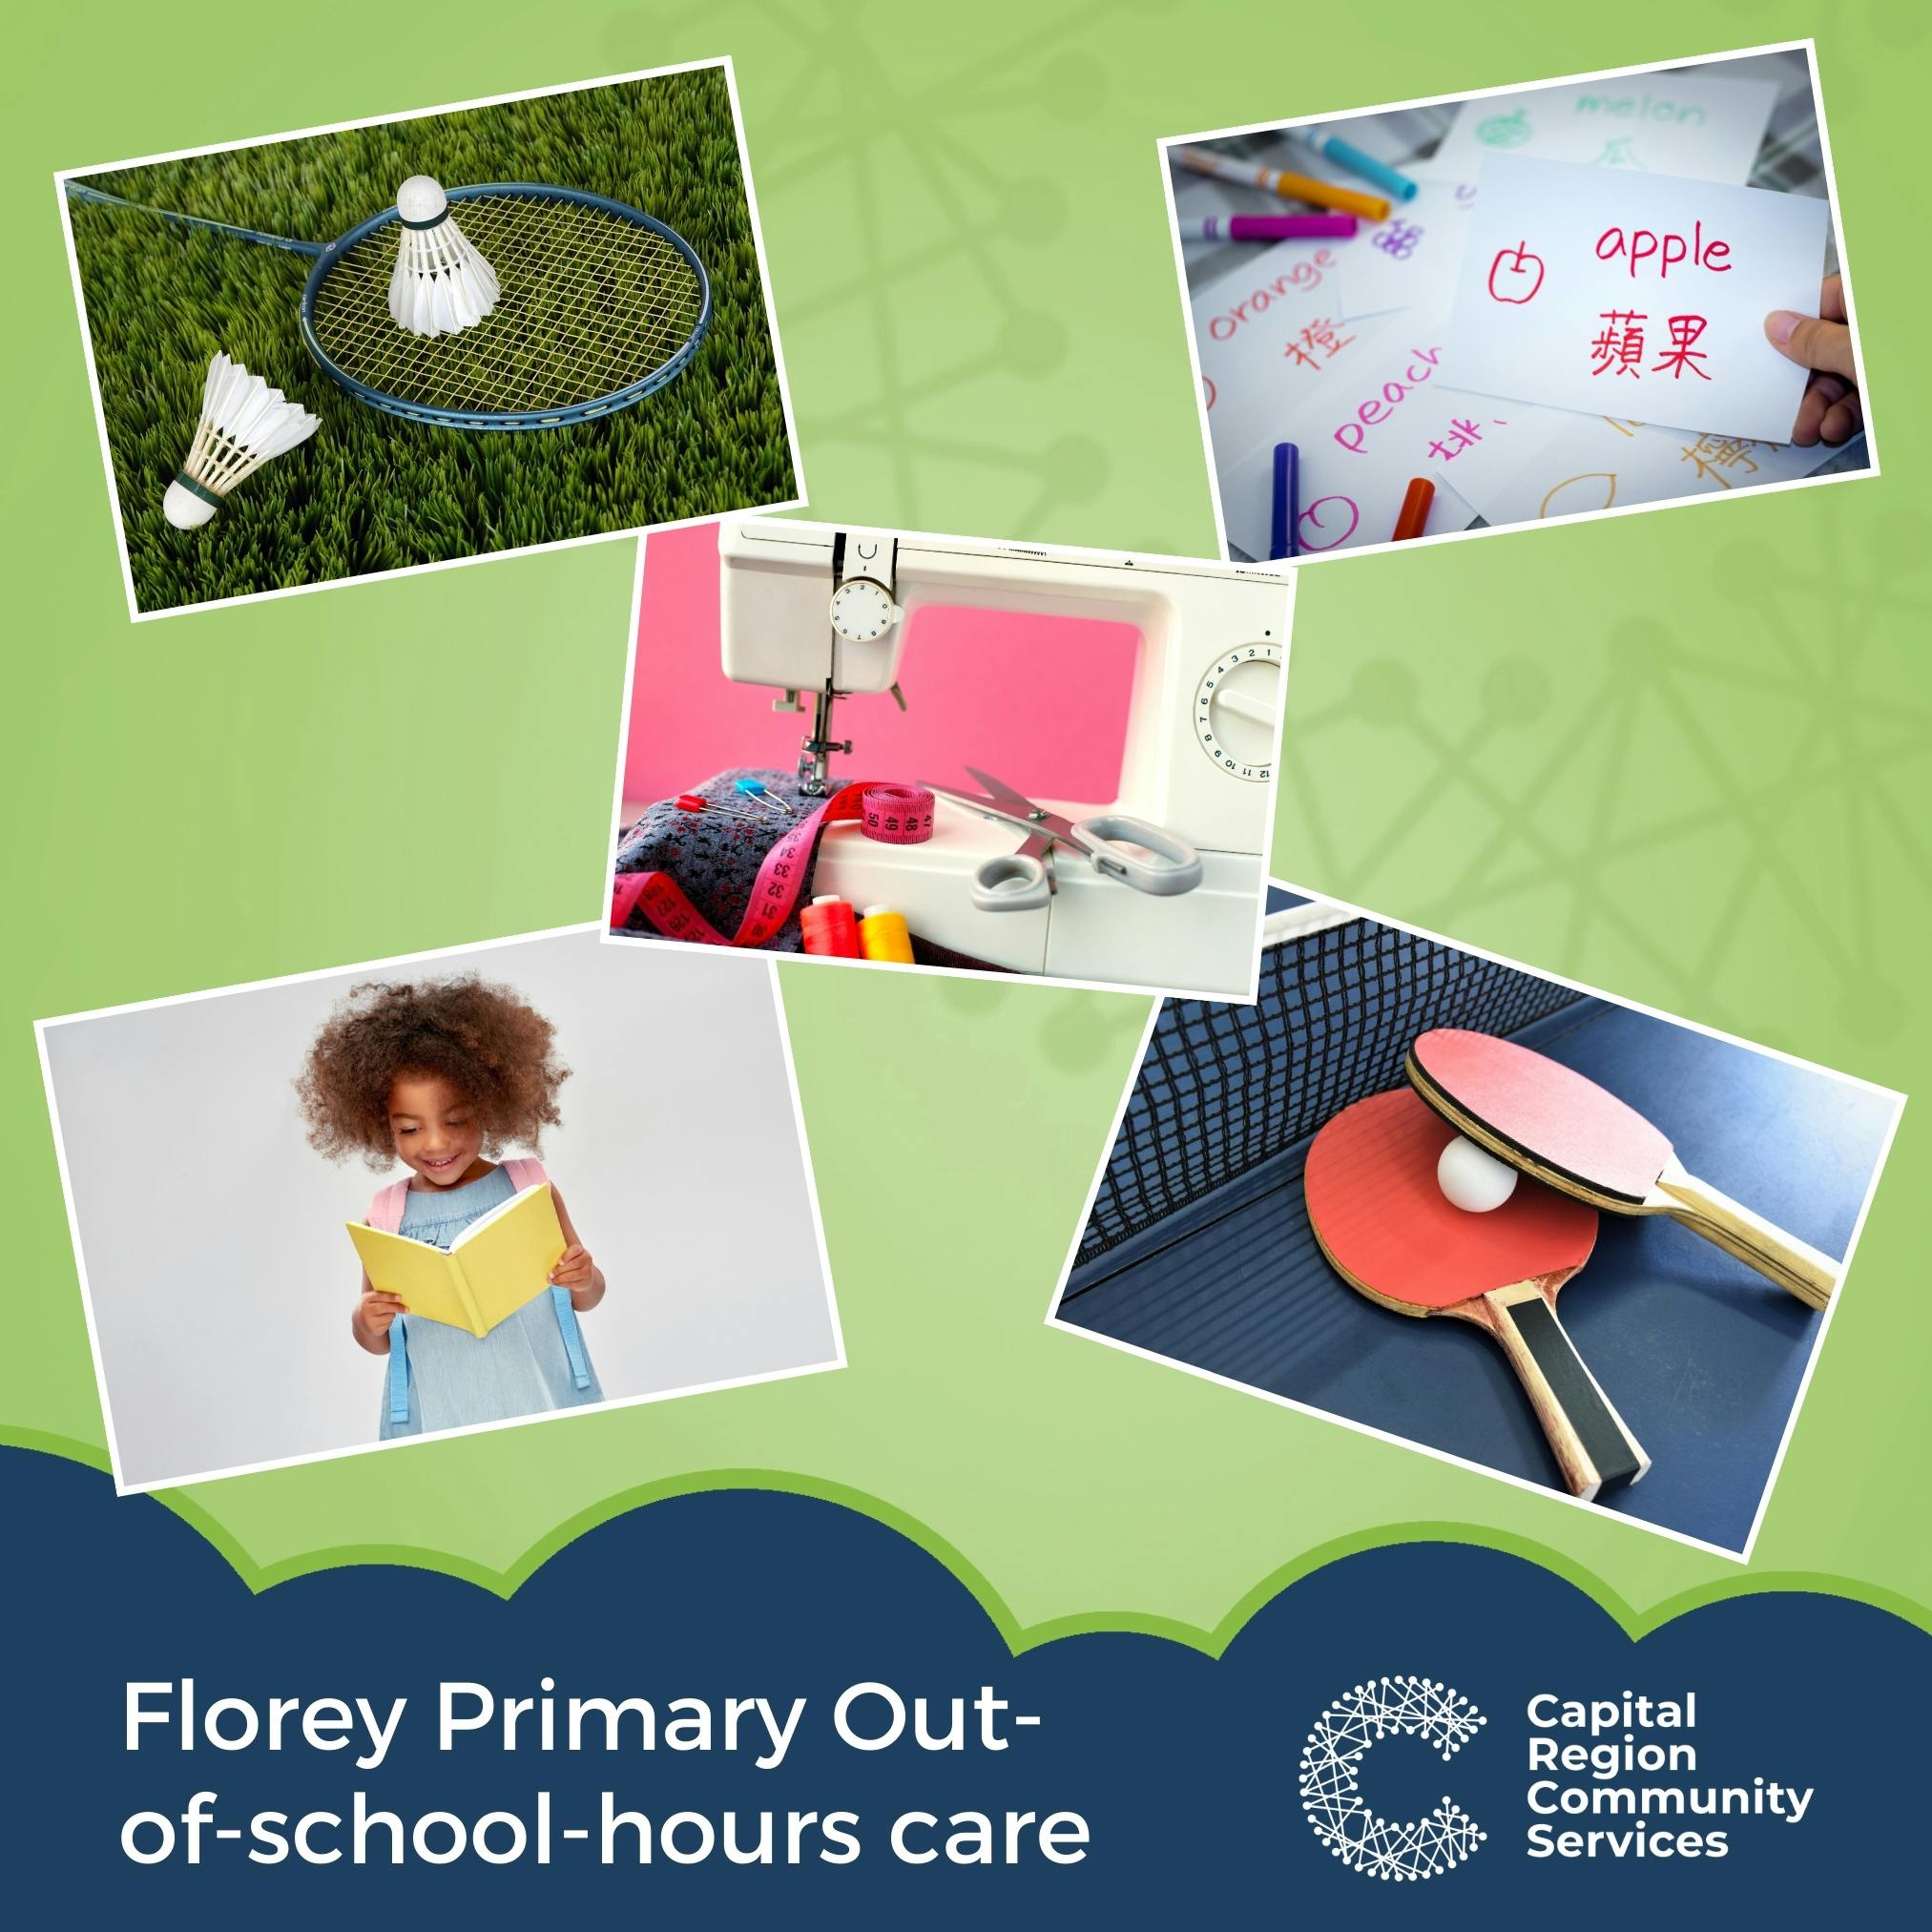 Learning for fun at Florey Primary out-of-school-hours care 